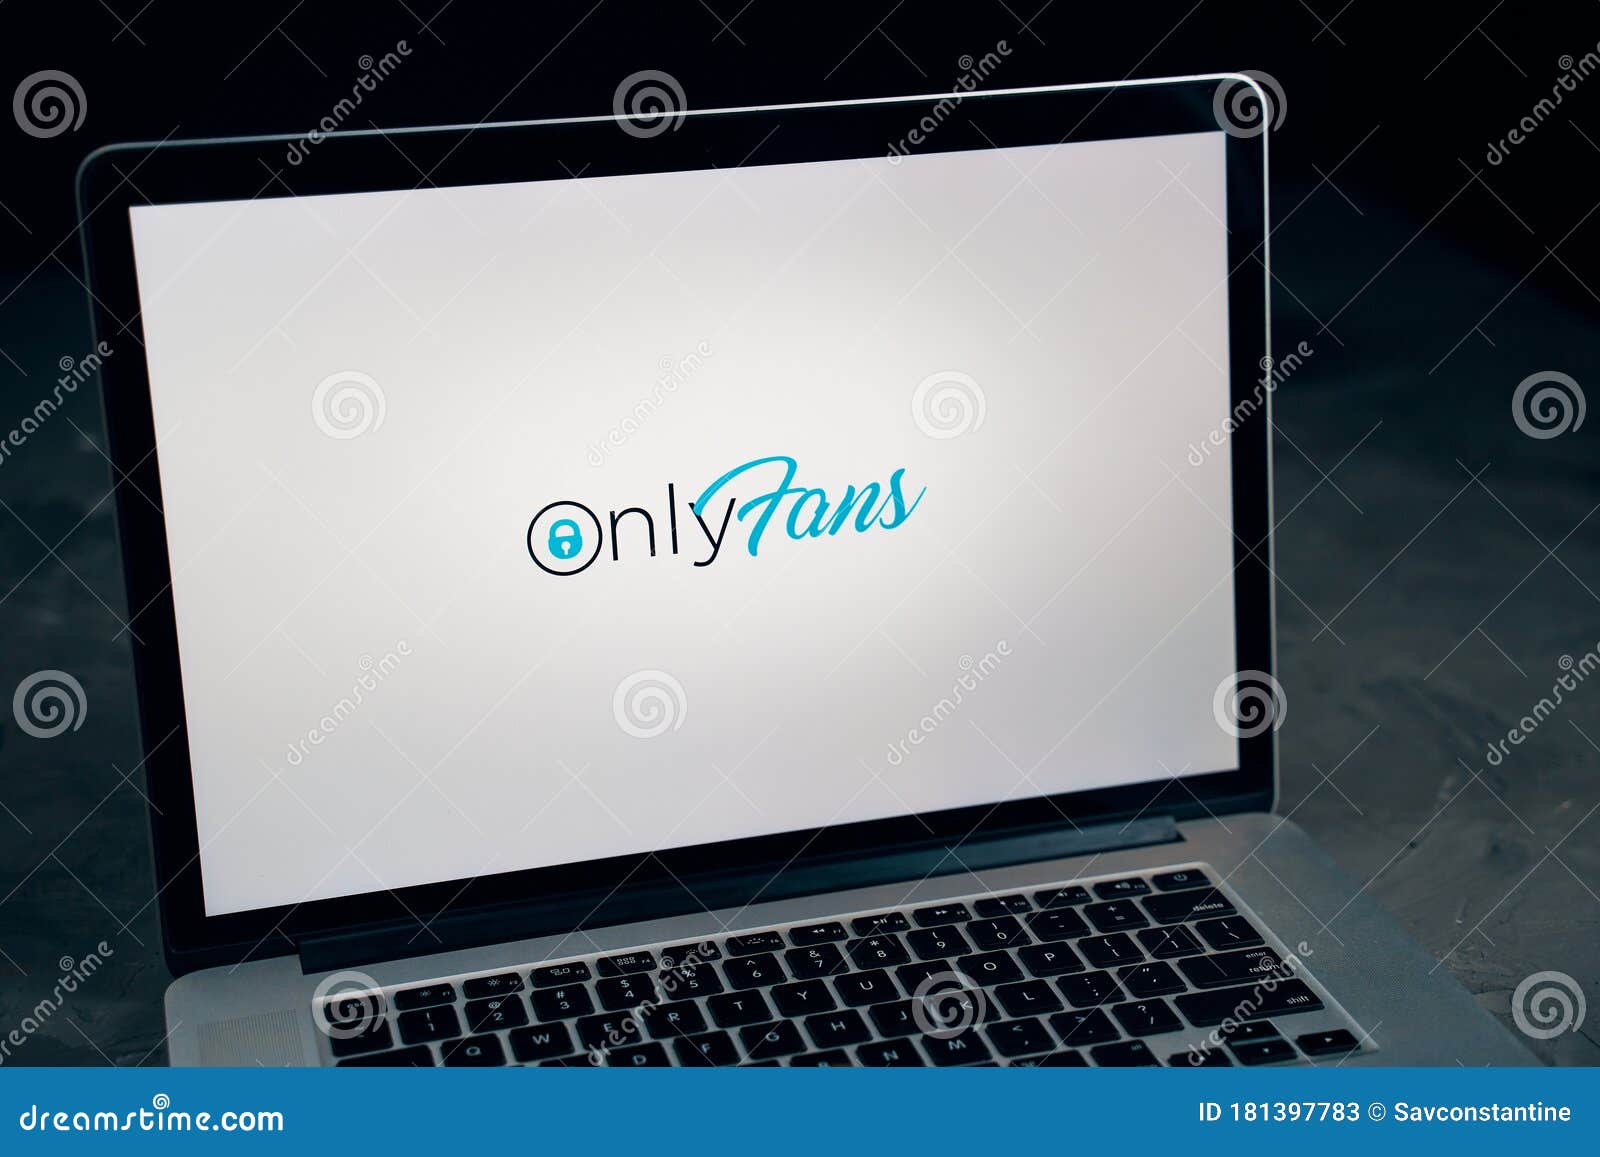 Only fans preview